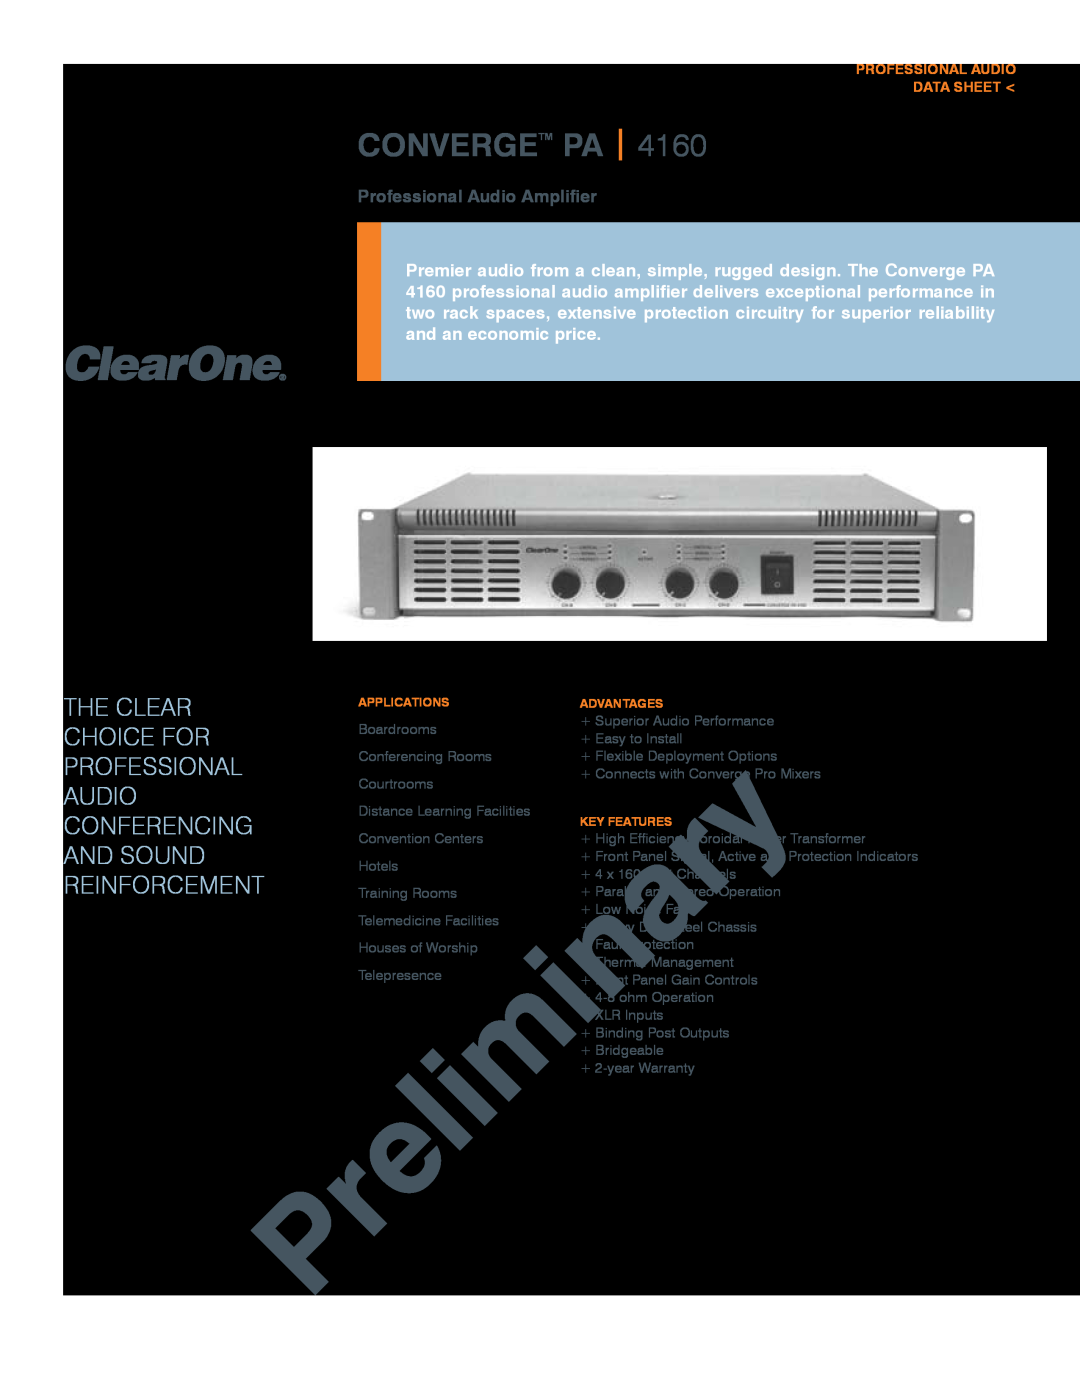 ClearOne comm PA 4160 warranty PROFESSIONAL Audio DATA SHEET, Convergetm Pa, The Clear, Choice For, Professional 